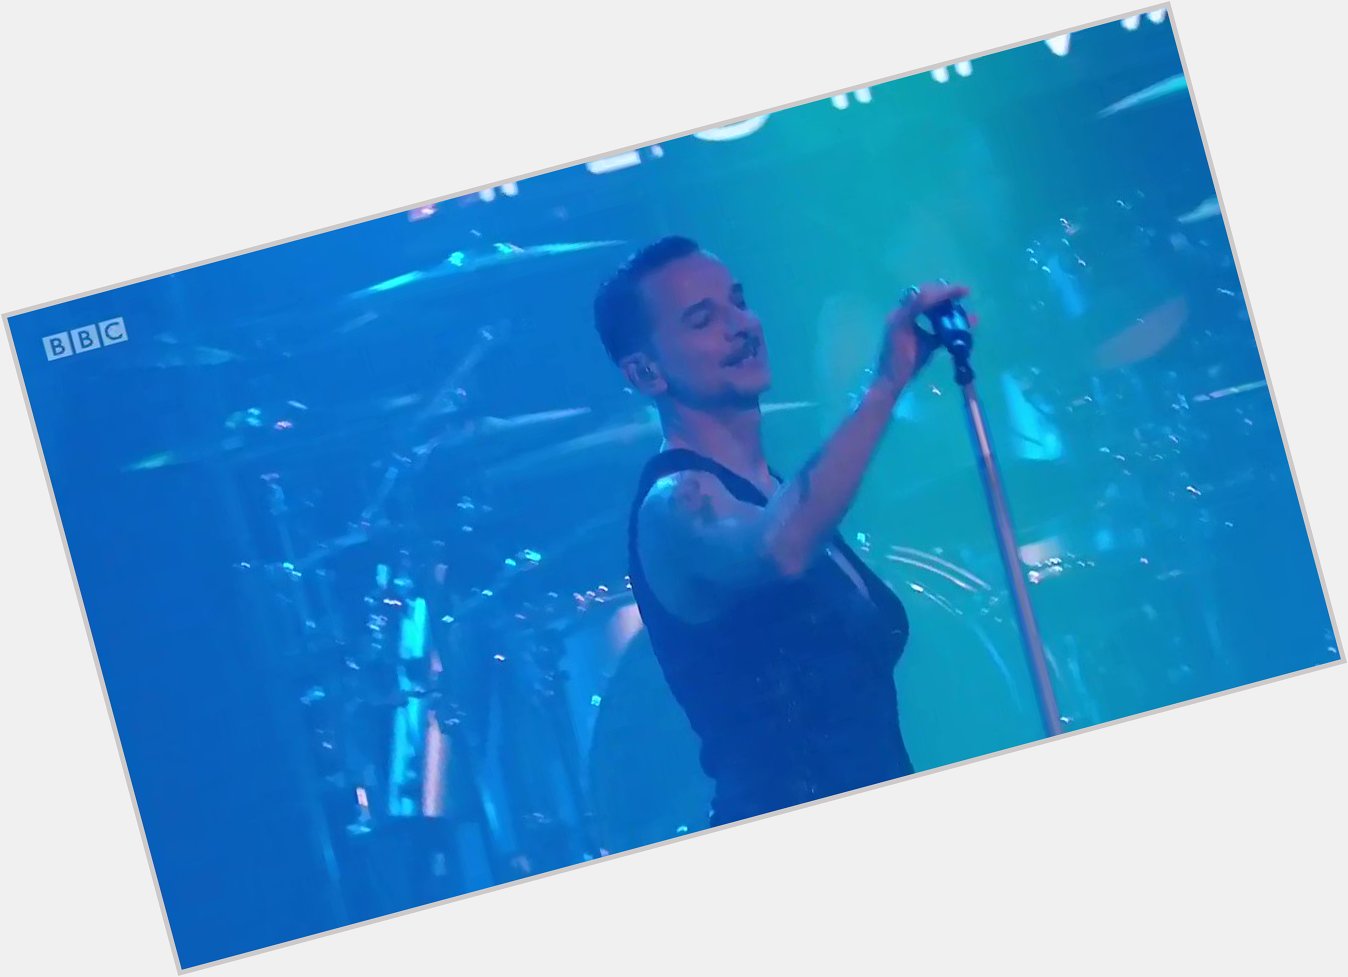 Happy Birthday, Dave Gahan.

This performance will always be here, in our heart. 